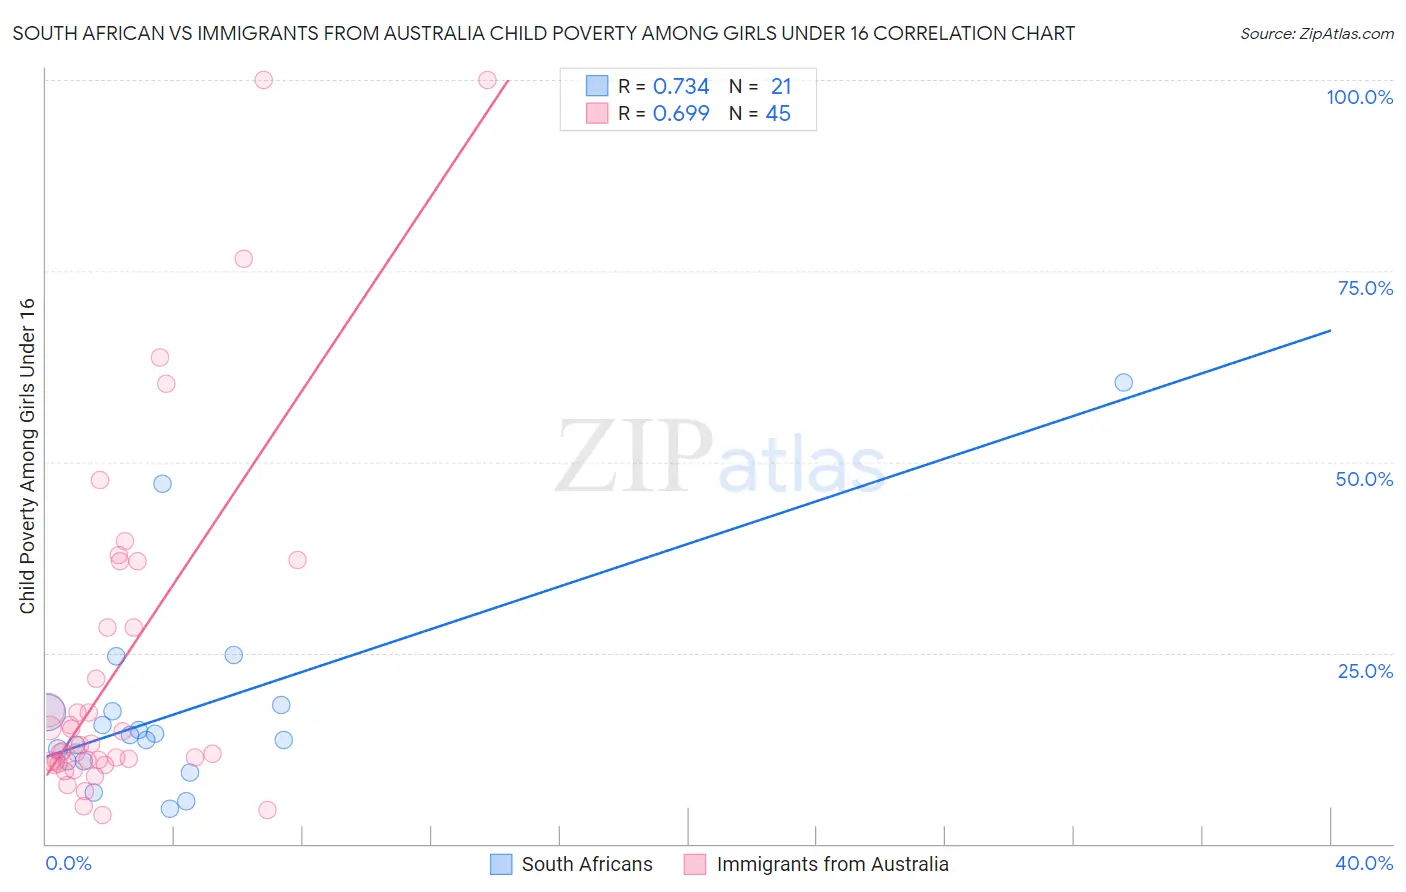 South African vs Immigrants from Australia Child Poverty Among Girls Under 16